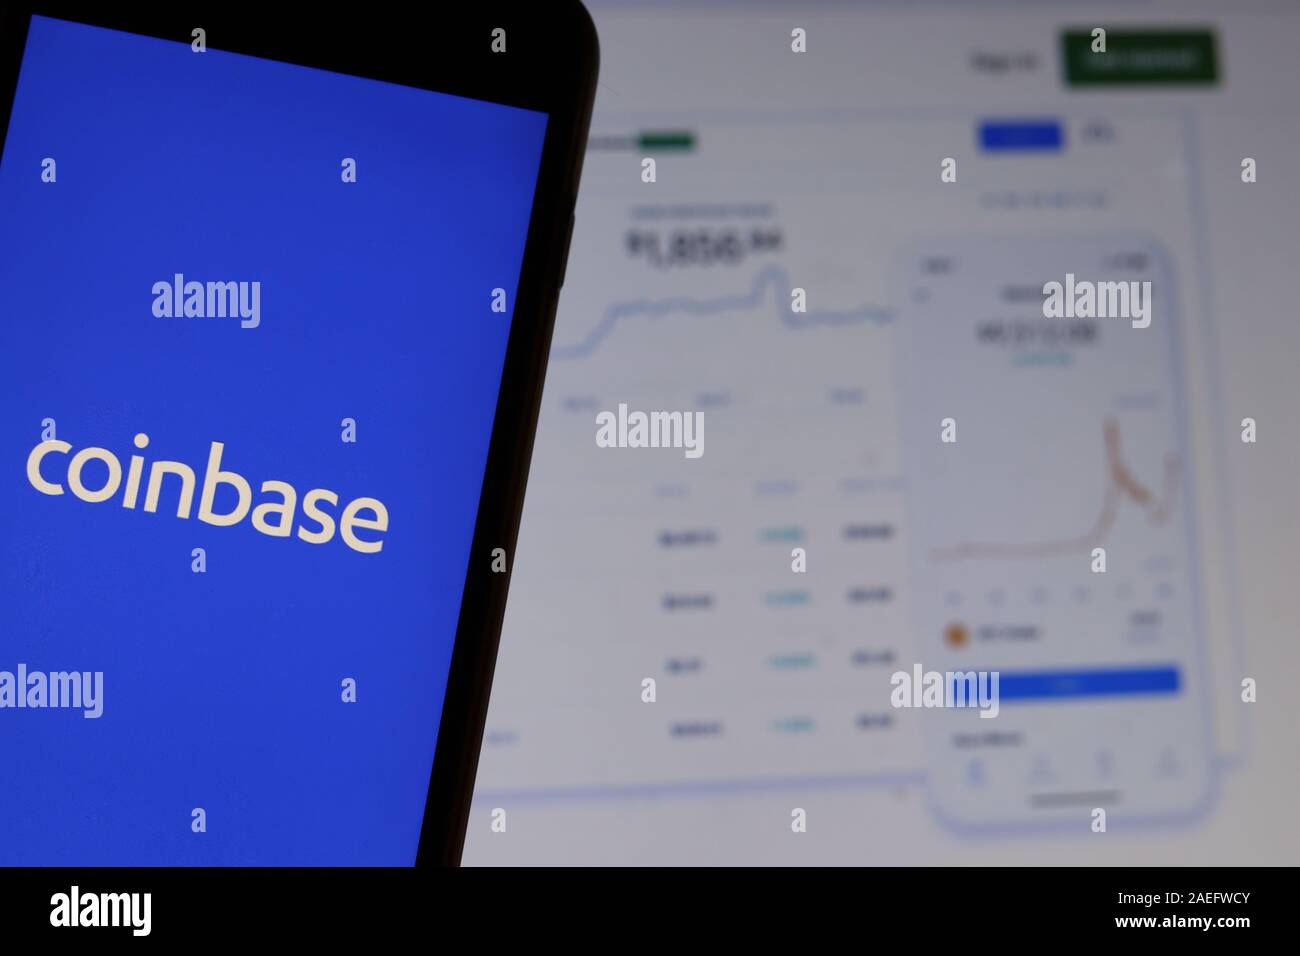 Los Angeles, USA - 10 March 2020: Coinbase icon app logo on phone screen close up with website on blurry background, Illustrative Editorial Stock Photo